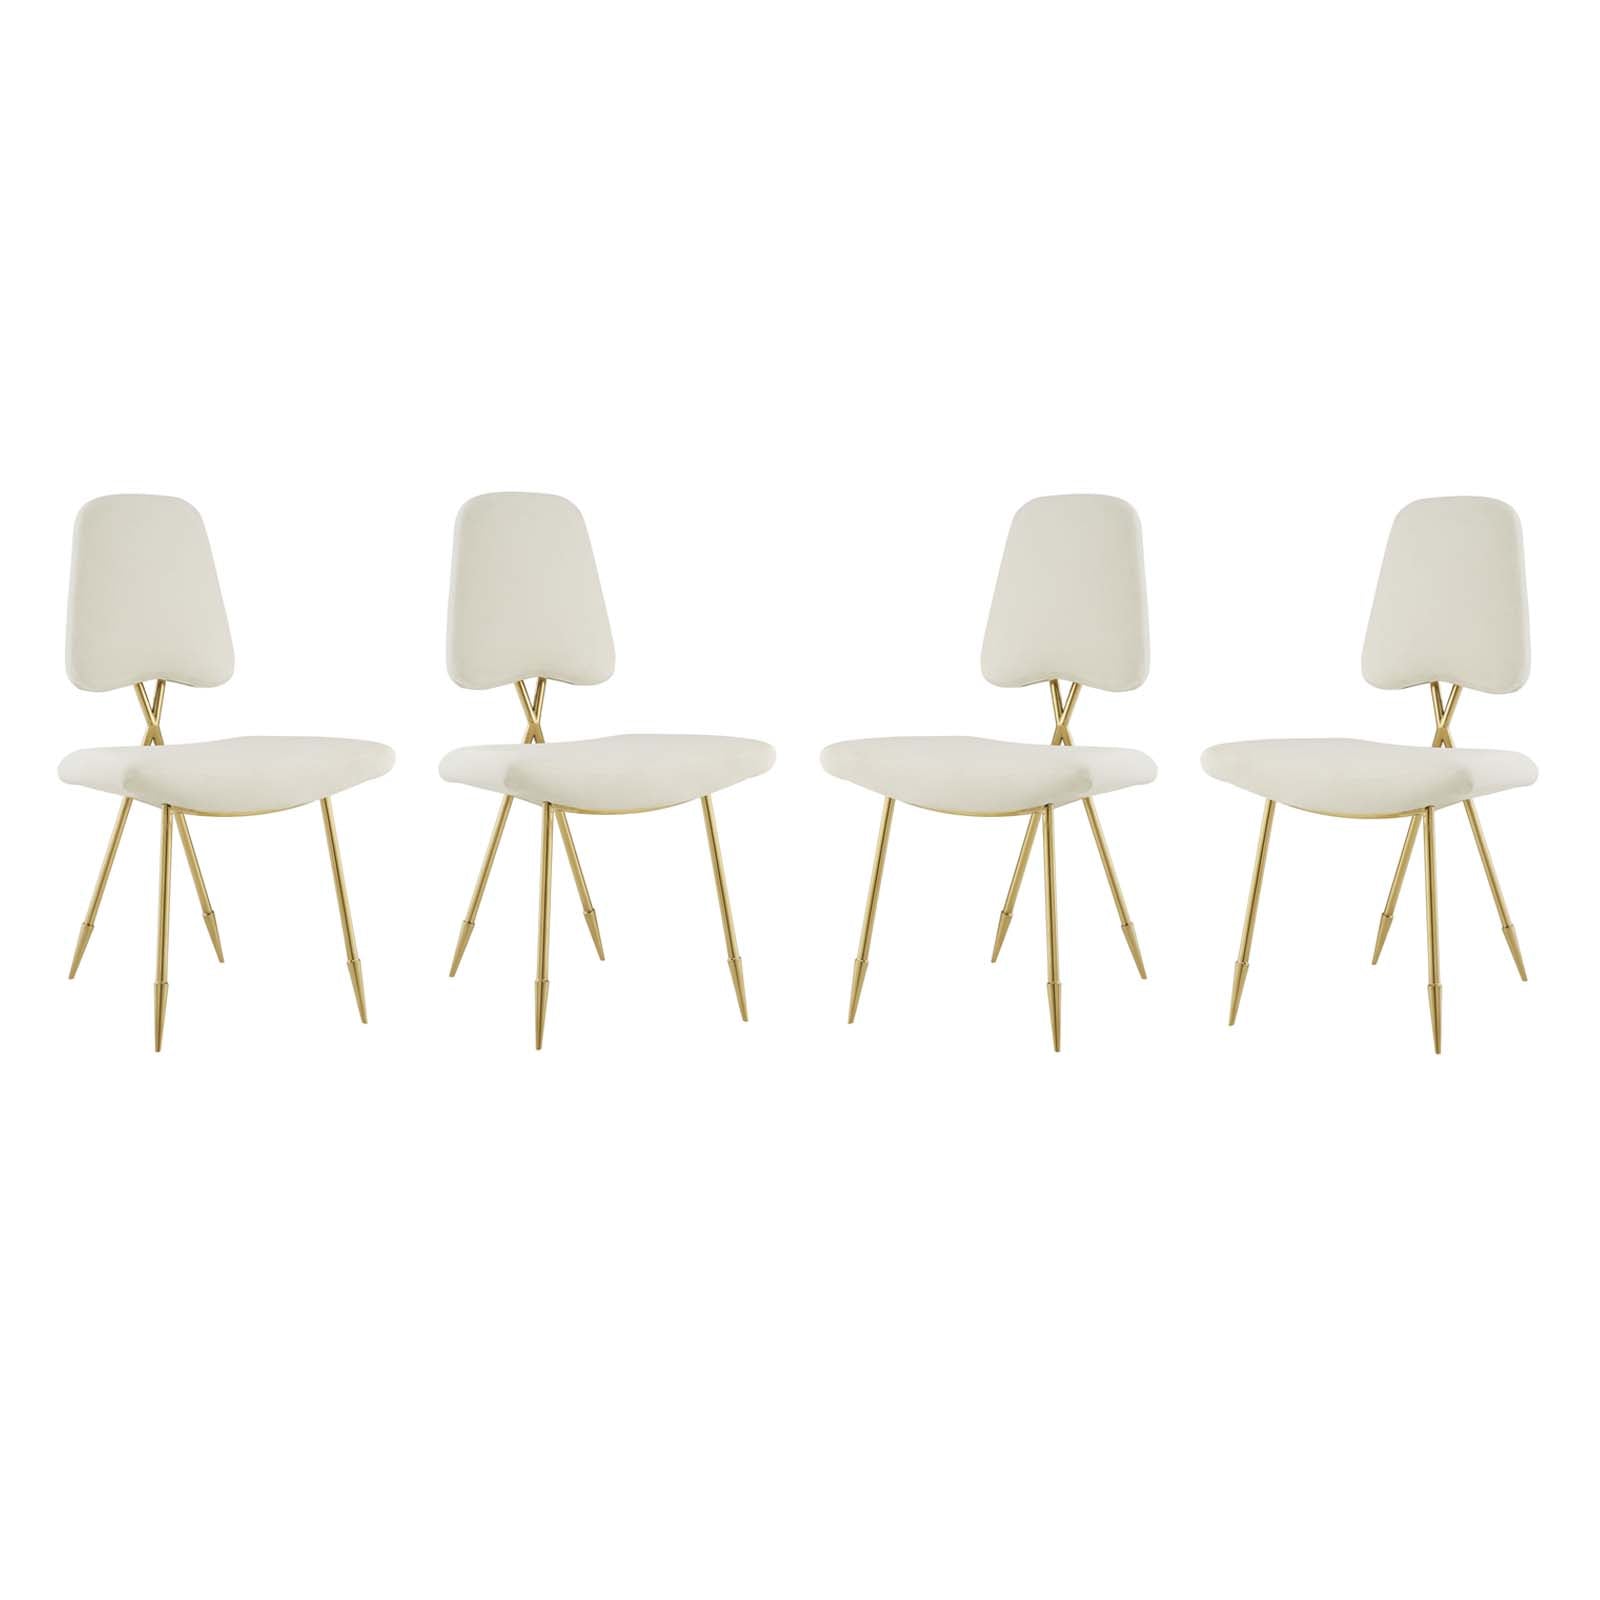 Modway Dining Chairs - Ponder Dining Side Chair Ivory (Set of 4)